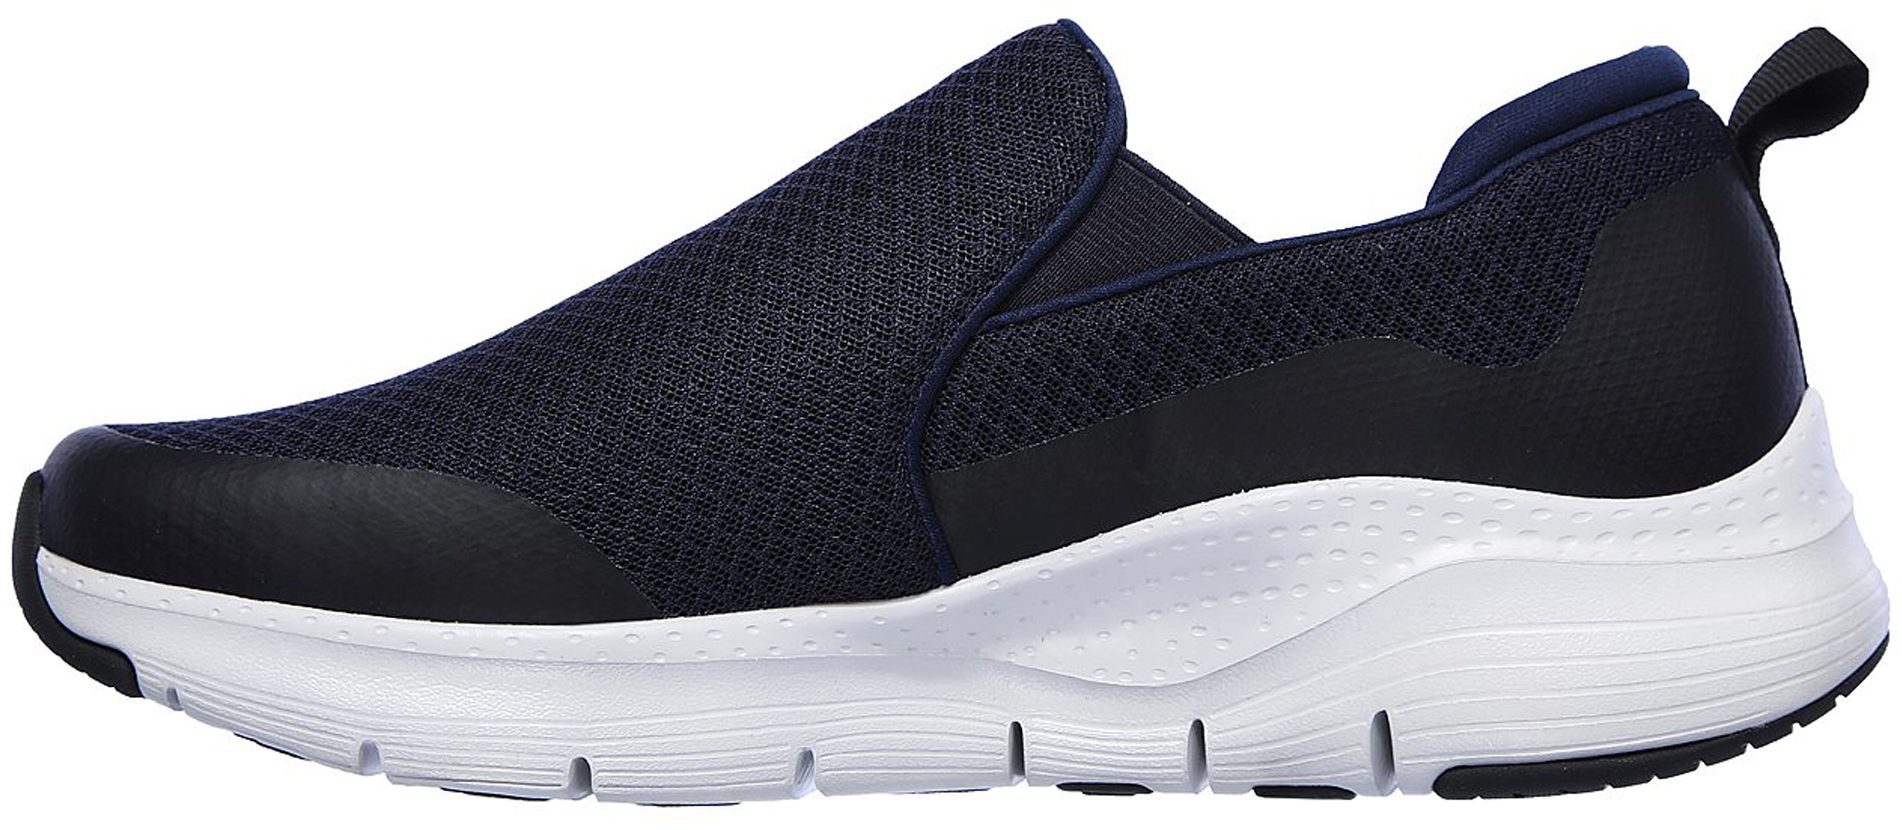 Skechers Arch Fit - Banlin Navy 232043 NVY - Trainers - Humphries Shoes